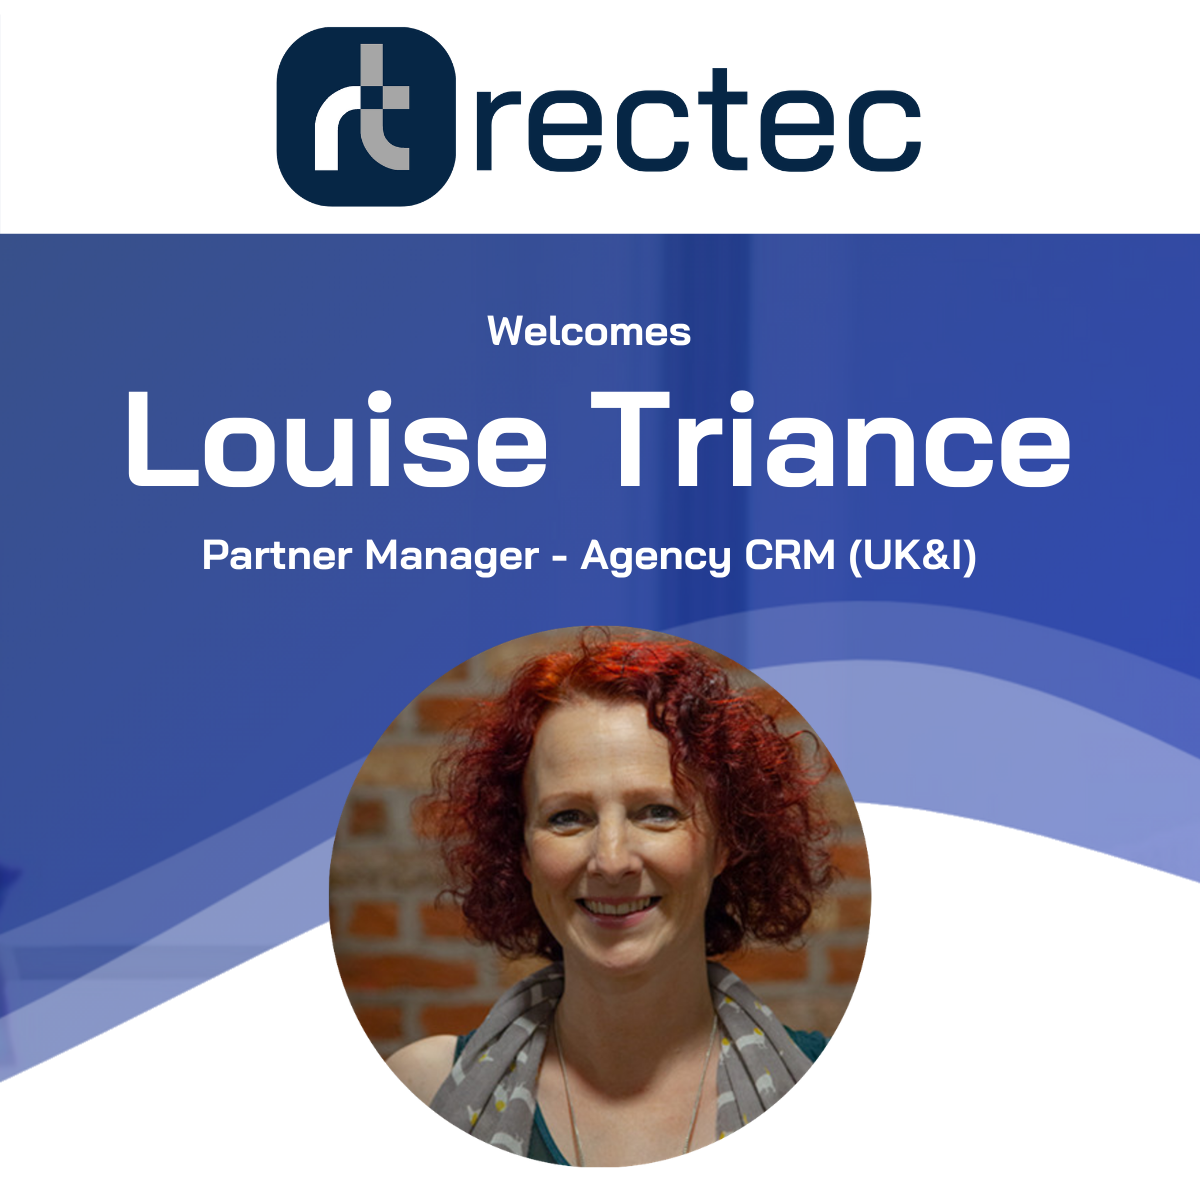 Rectec welcomes Louise Triance